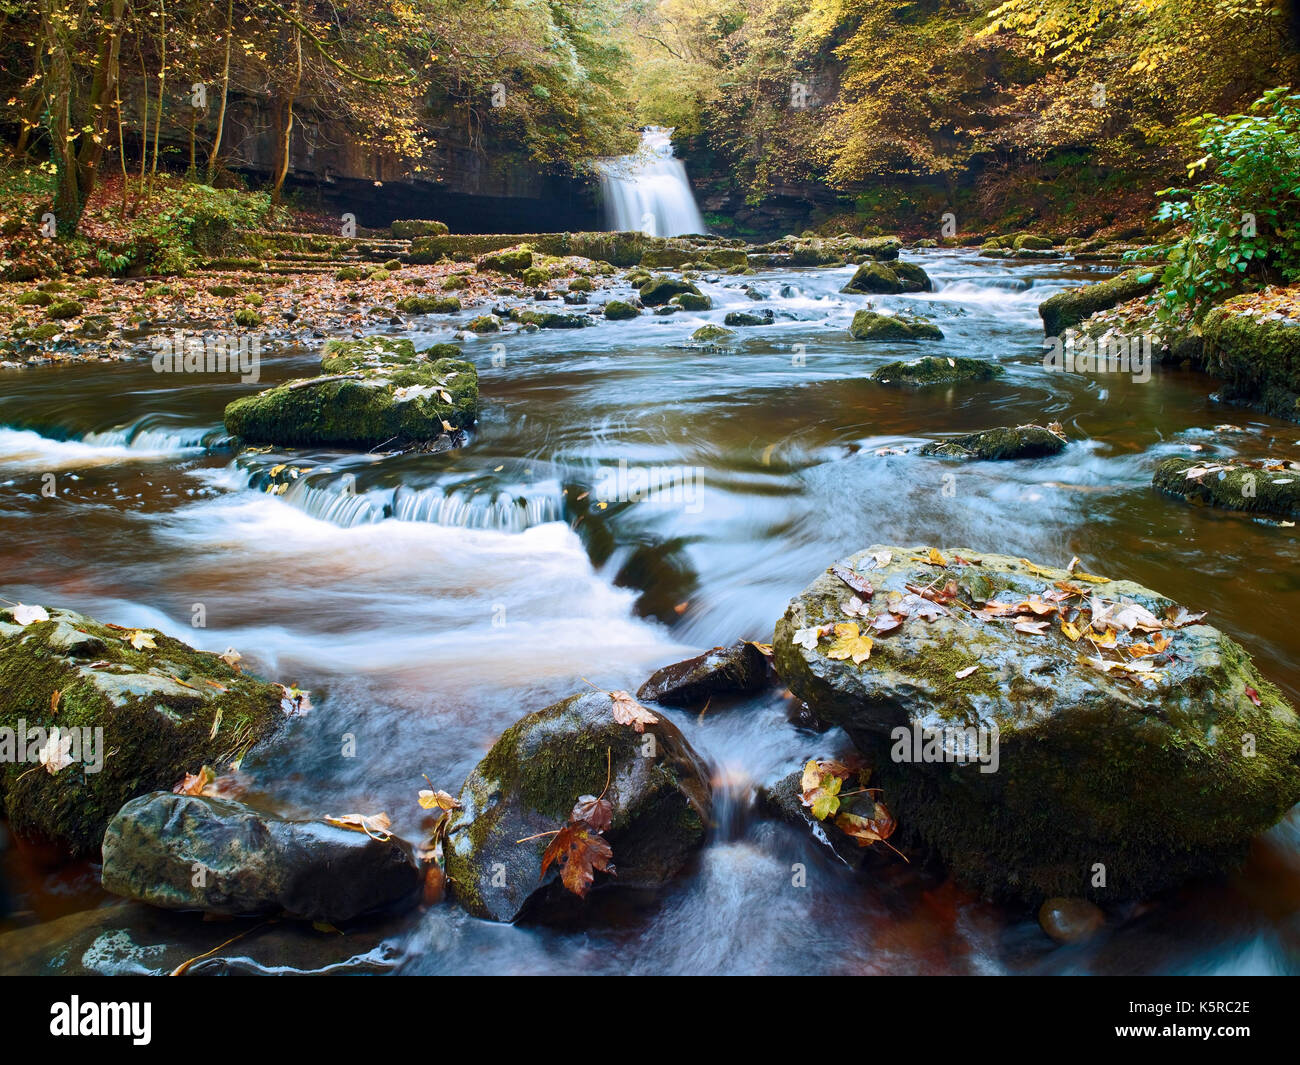 A view of West Burton Falls, Wensleydale, North Yorkshire at the peak of autumn. Stock Photo